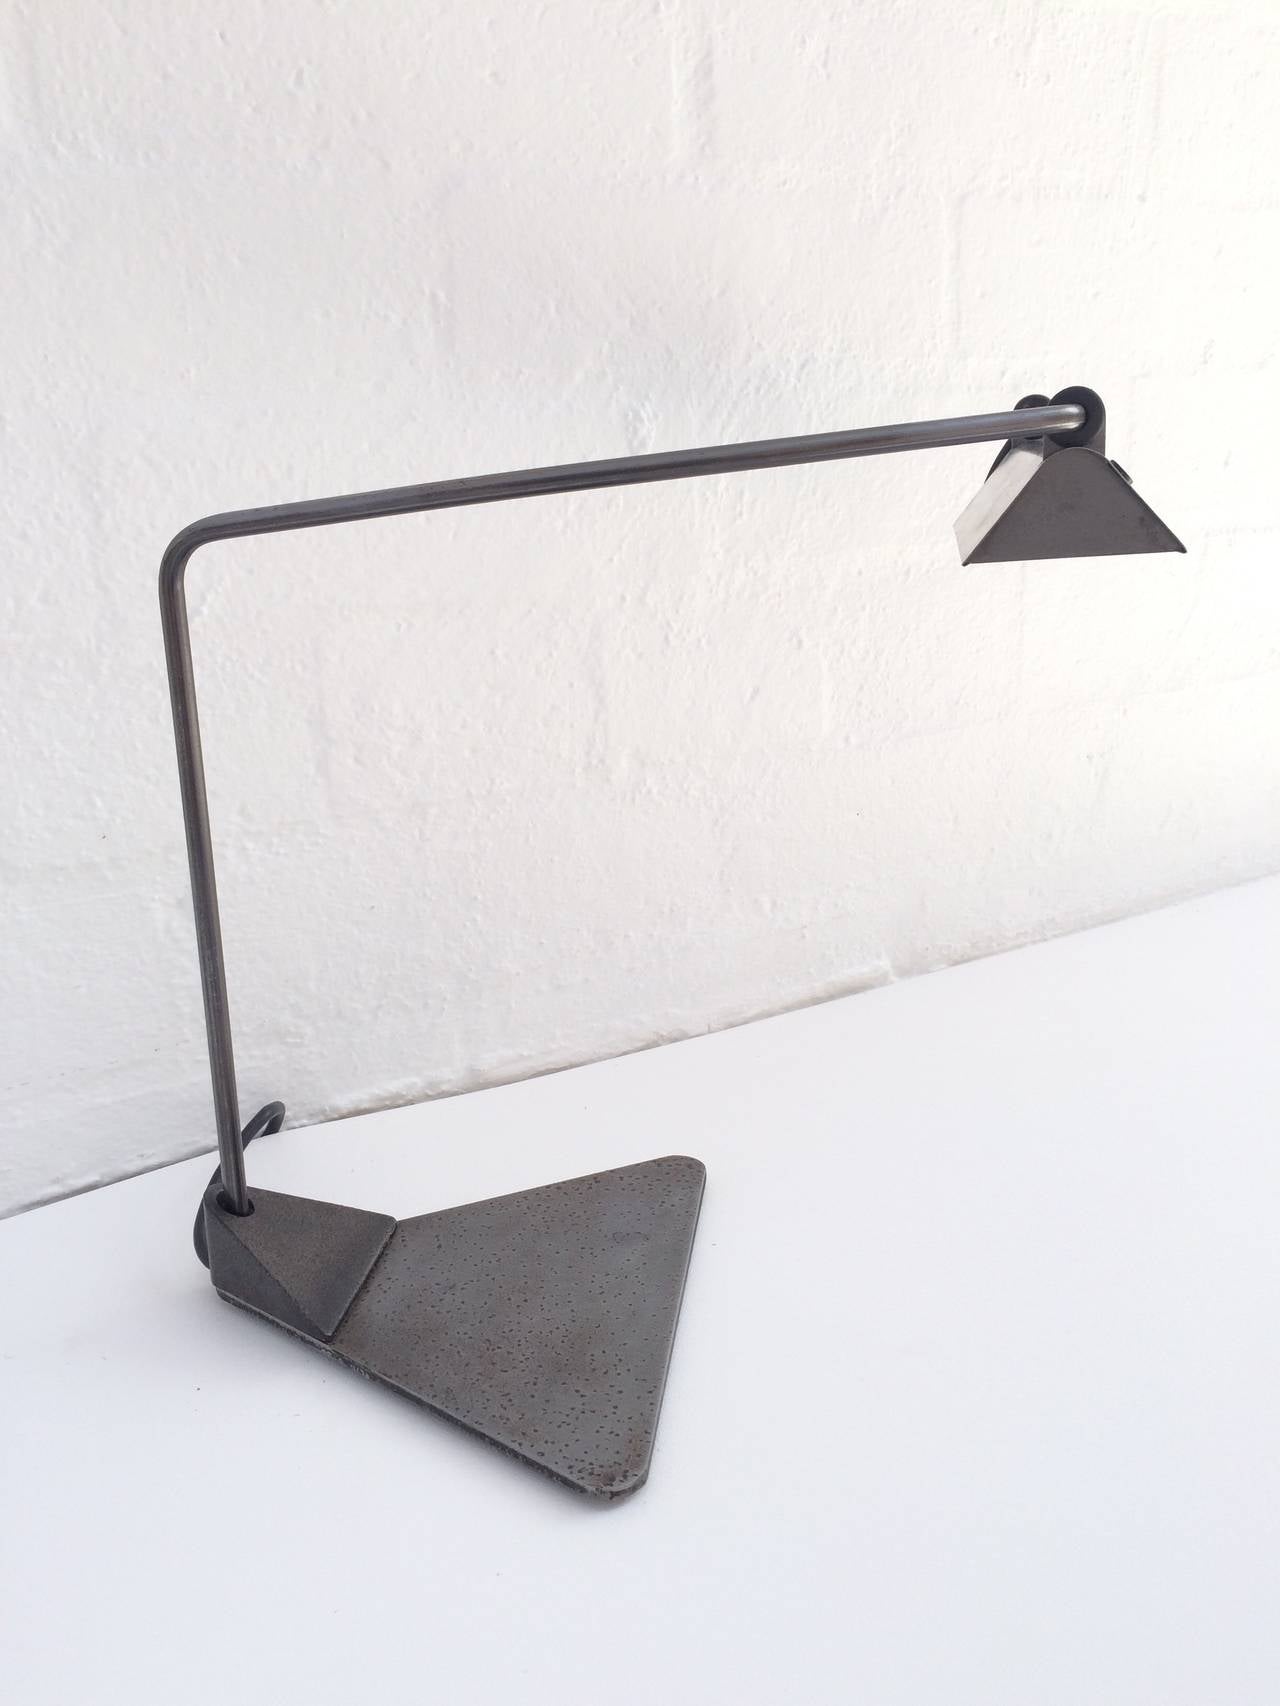 Desk lamp designed by Ron Rezek. 
This lamp has a raw steel finish, an adjustable arm and shade,
circa 1980s.